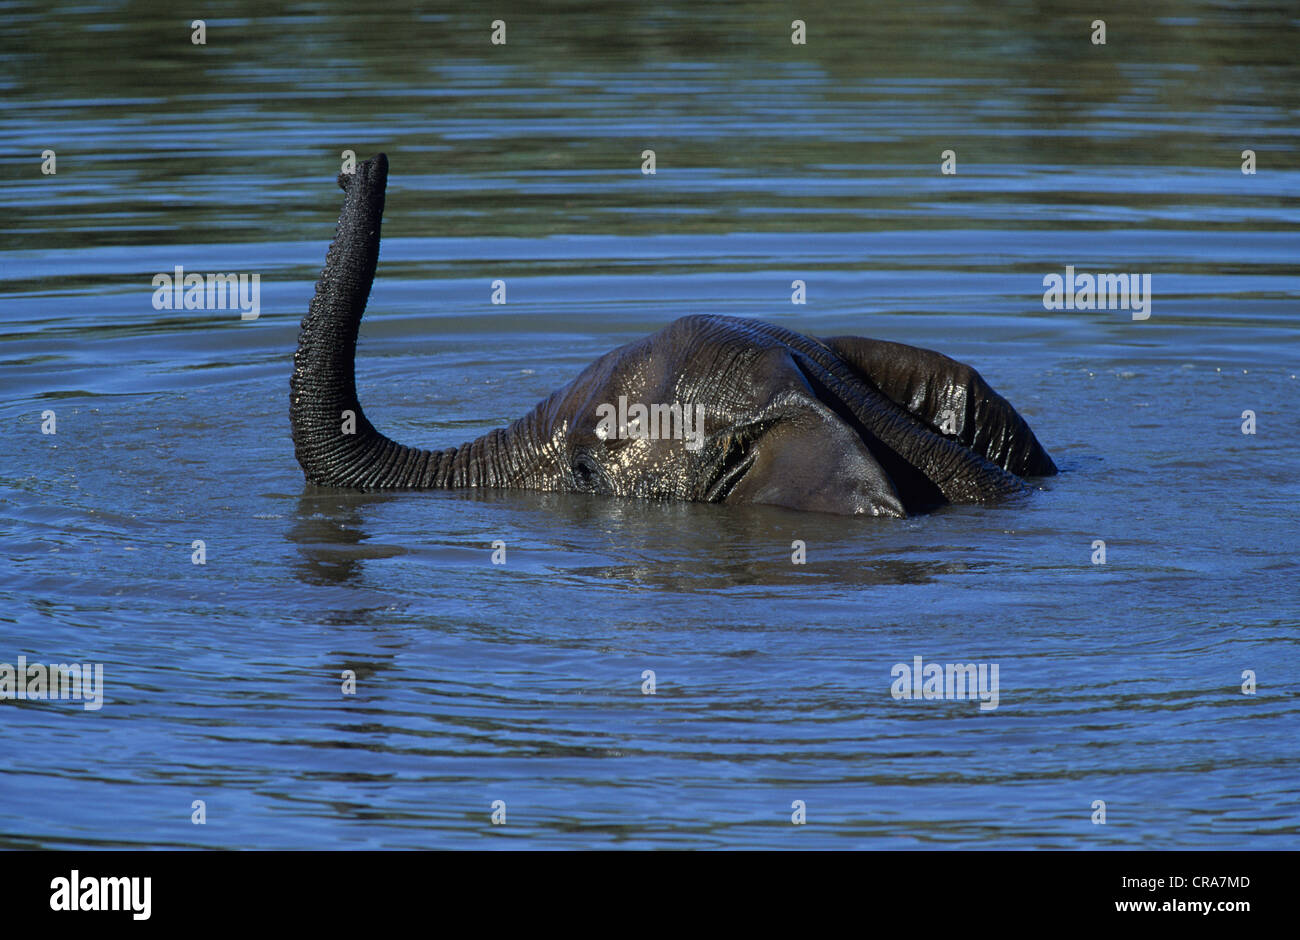 African Elephant (Loxodonta africana), swimming, Kruger National Park, South Africa, Africa Stock Photo